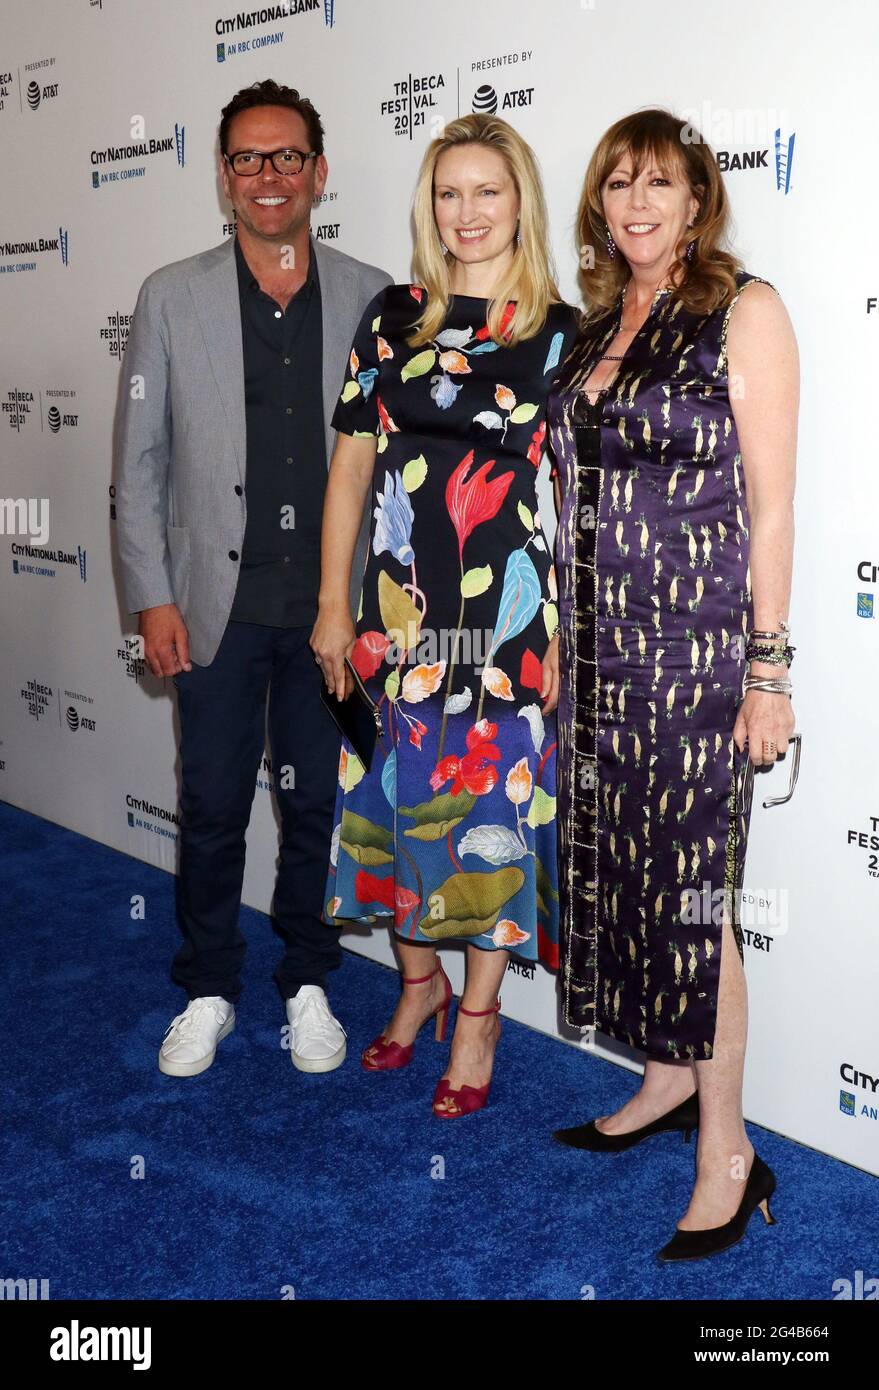 NEW YORK, NY- JUNE 19: James Murdoch, Kathryn Hufschmid,  Jane Rosenthal at the Tribeca Film Festival Closing Night Celebration premiere of Untitled: Dave Chappeile Documentary at Radio City Music Hall in New York City on June 19, 2021. Credit: RW/MediaPunch Stock Photo